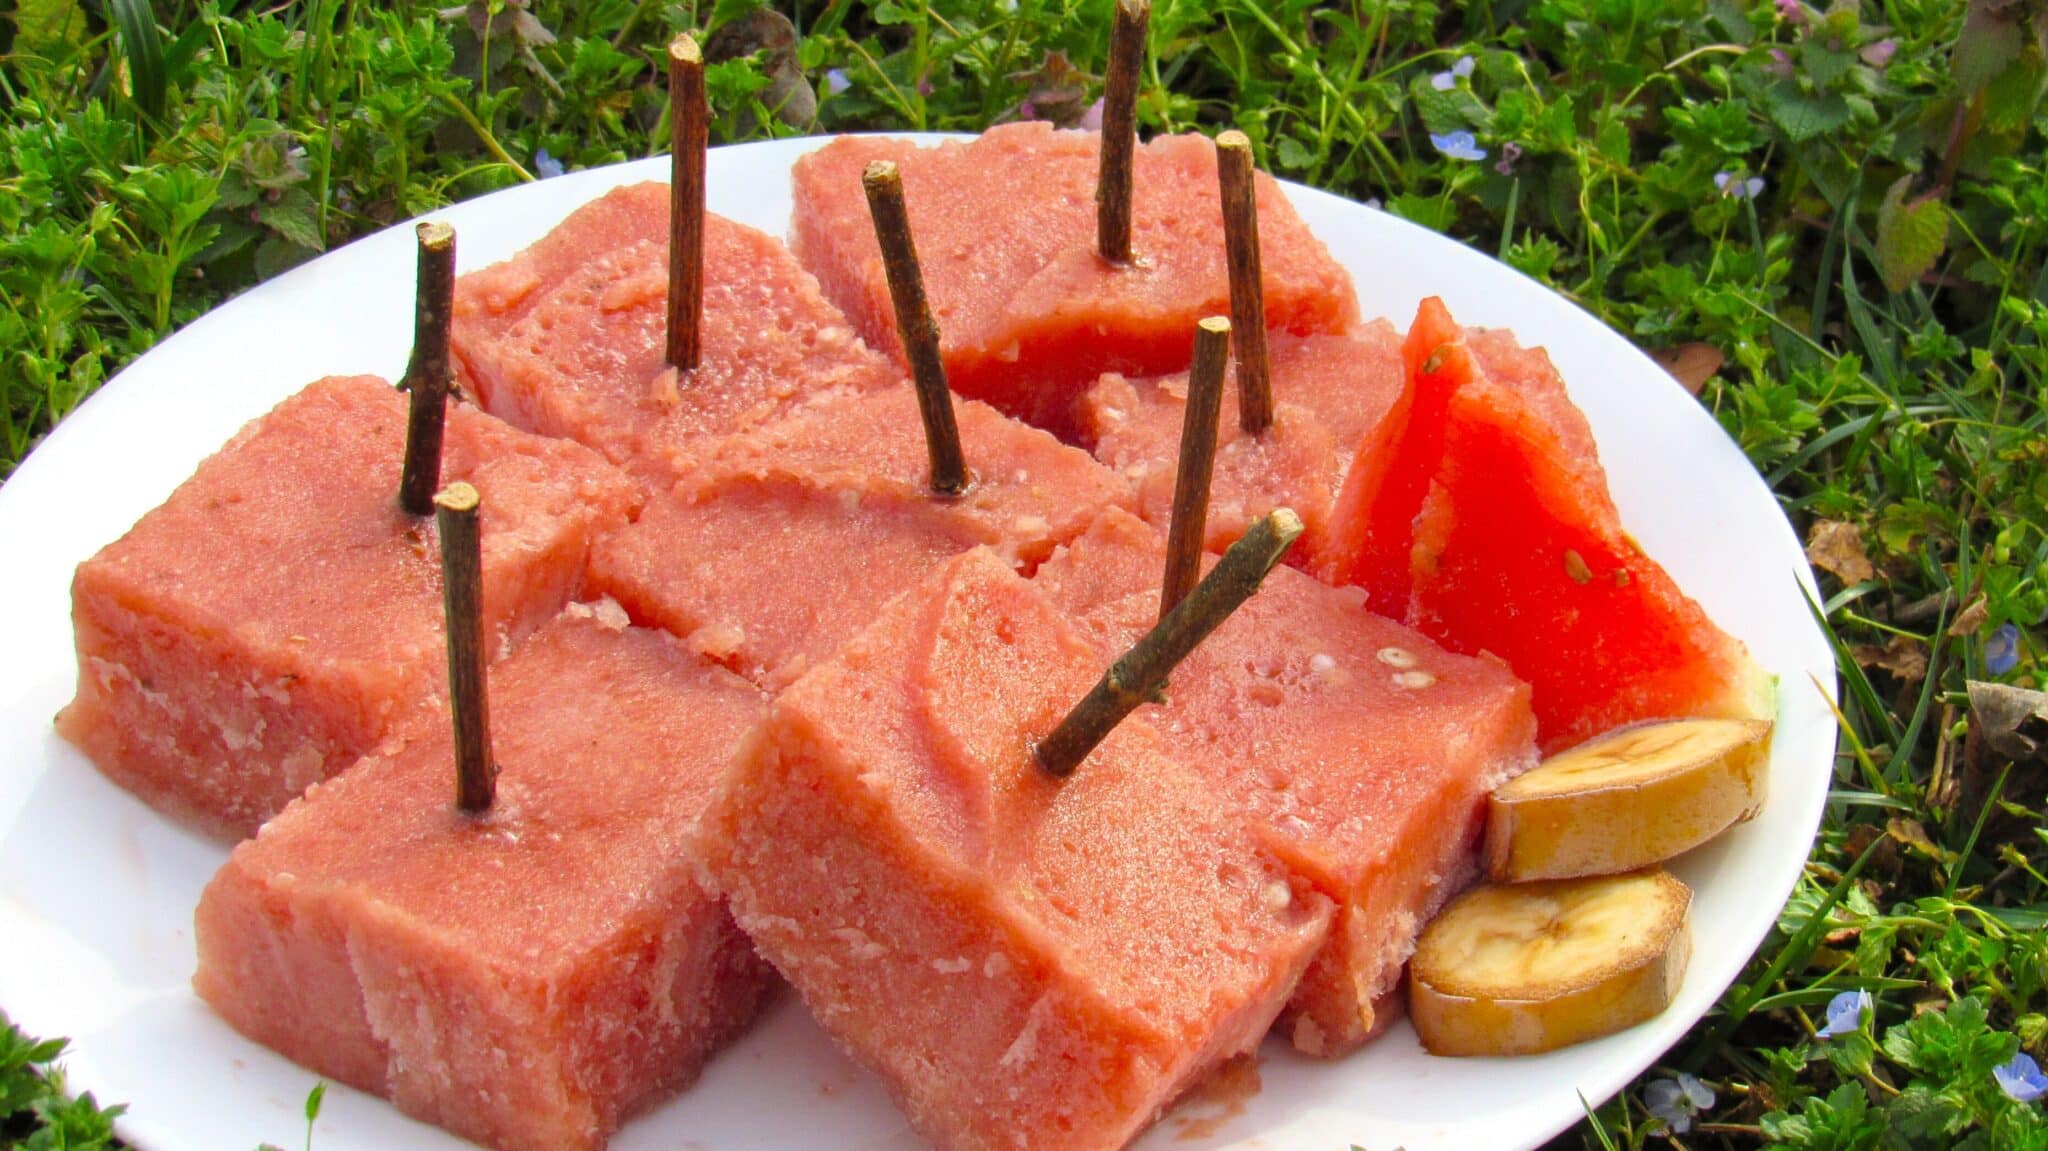 Watermelon popsicles are served on a white plate outside.